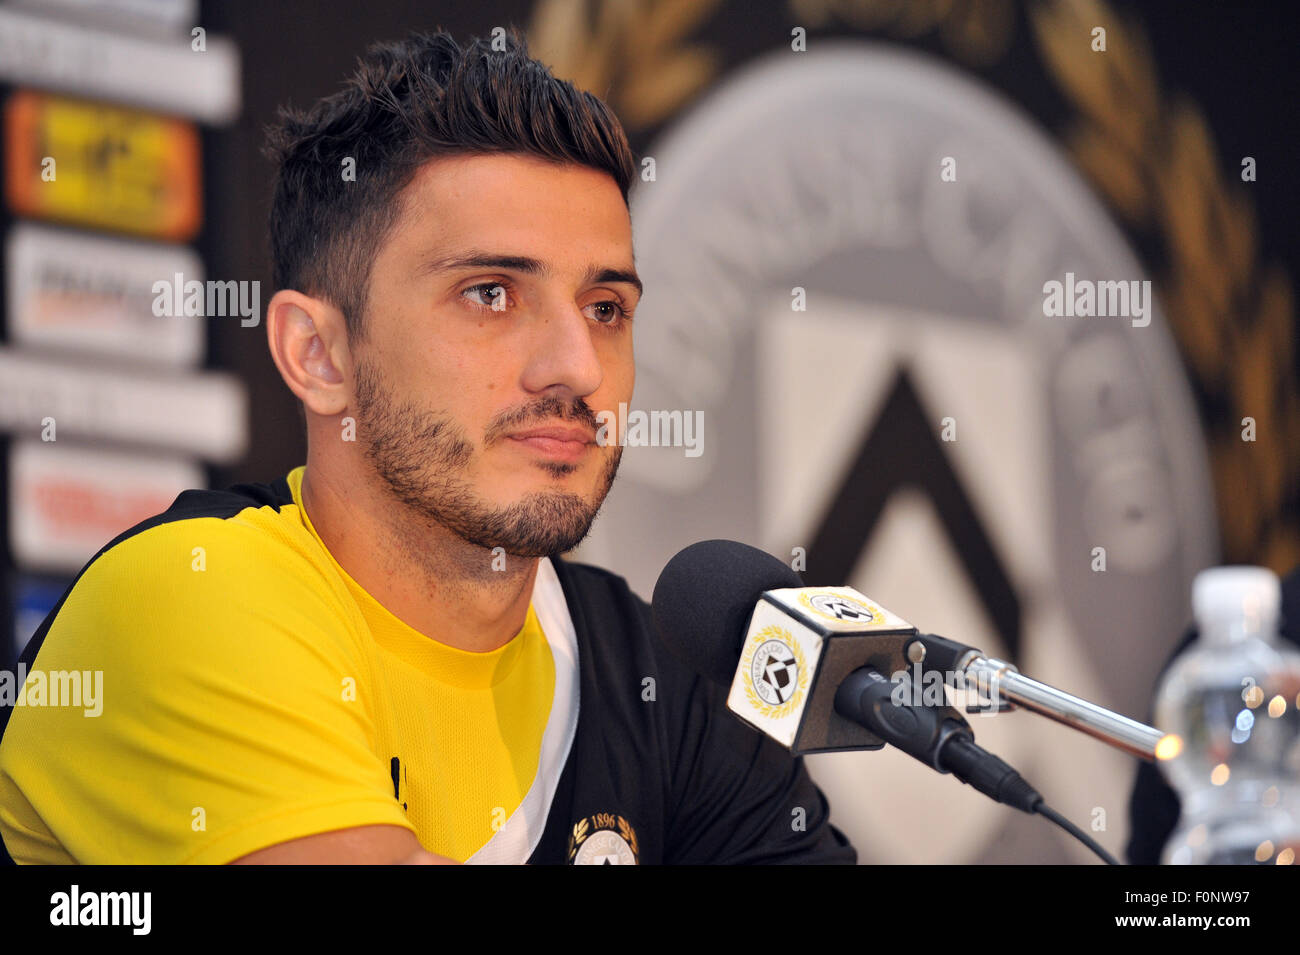 Udine, Italy. 19th August, 2015. press conference of presentation the new Udinese's midfielder Marco Antonio de Mattos Filho Marquinho. Acquired from AS Roma the midfielder signed with Udinese Calcio a four-year contract. Udine 19th August 2015.  Credit:  Simone Ferraro/Alamy Live News Stock Photo